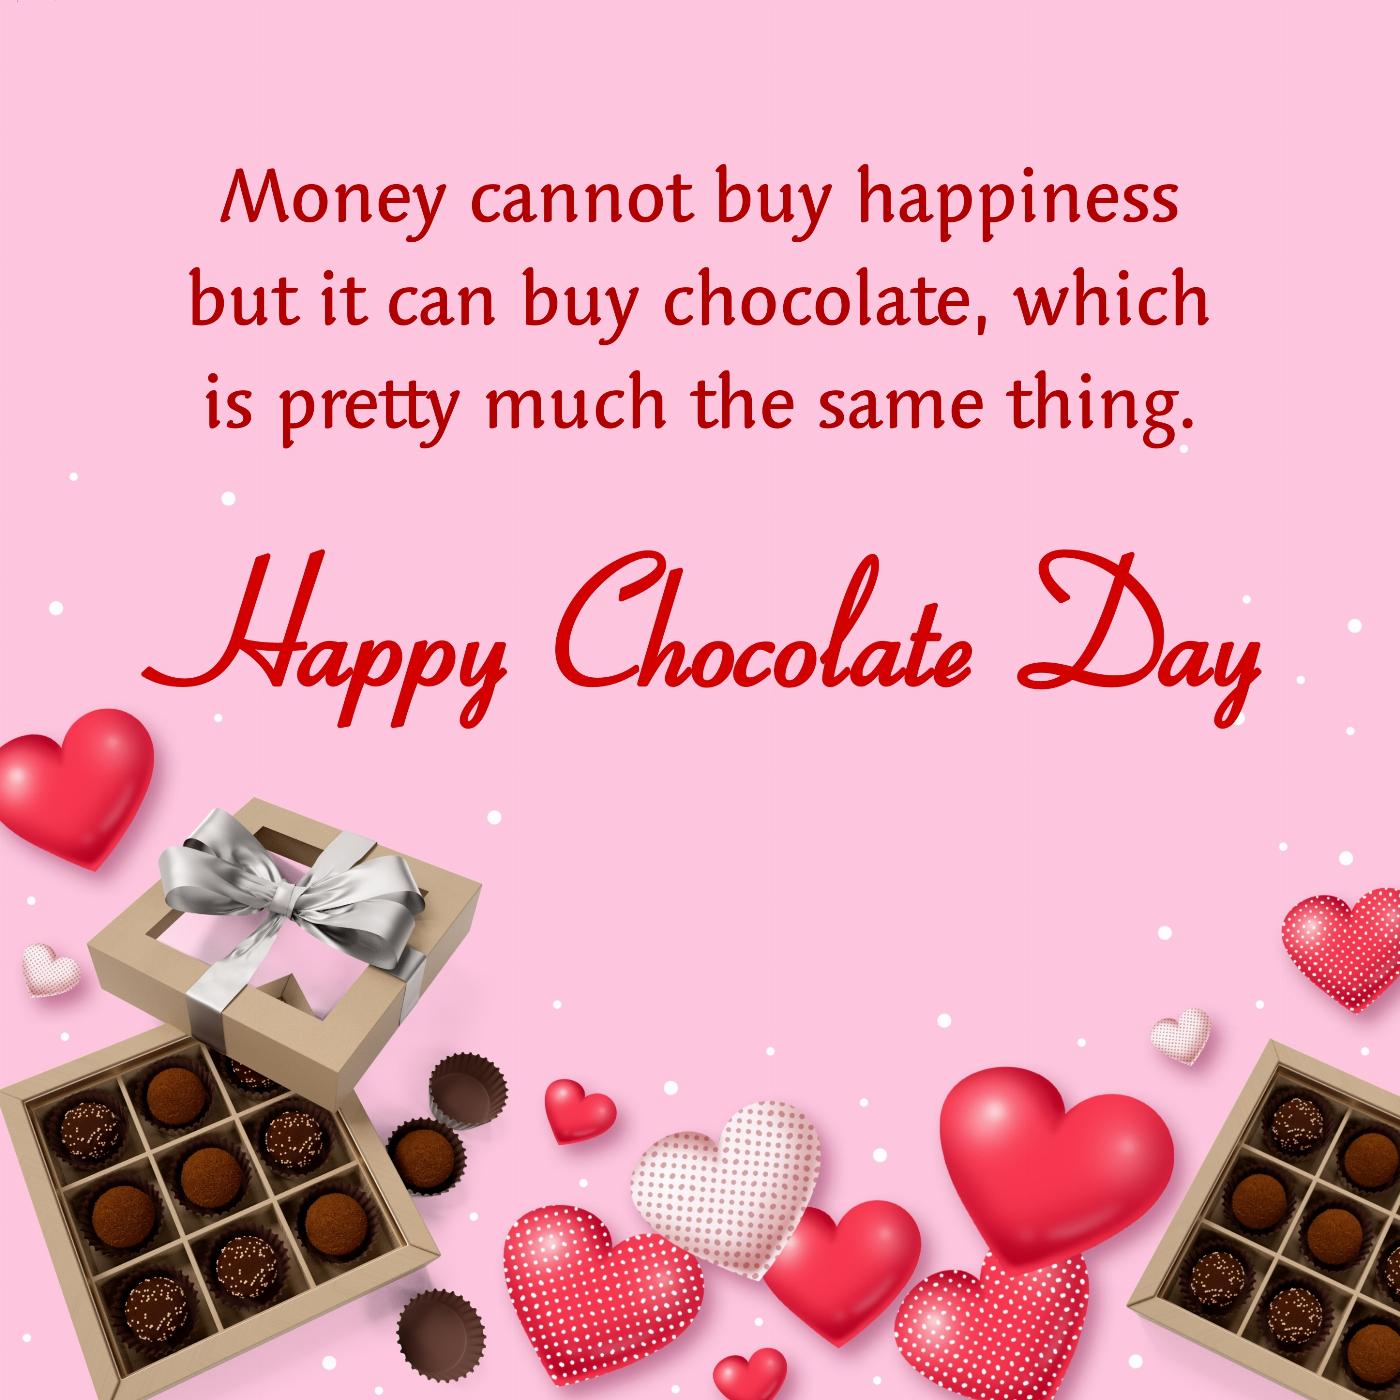 Money cannot buy happiness but it can buy chocolate